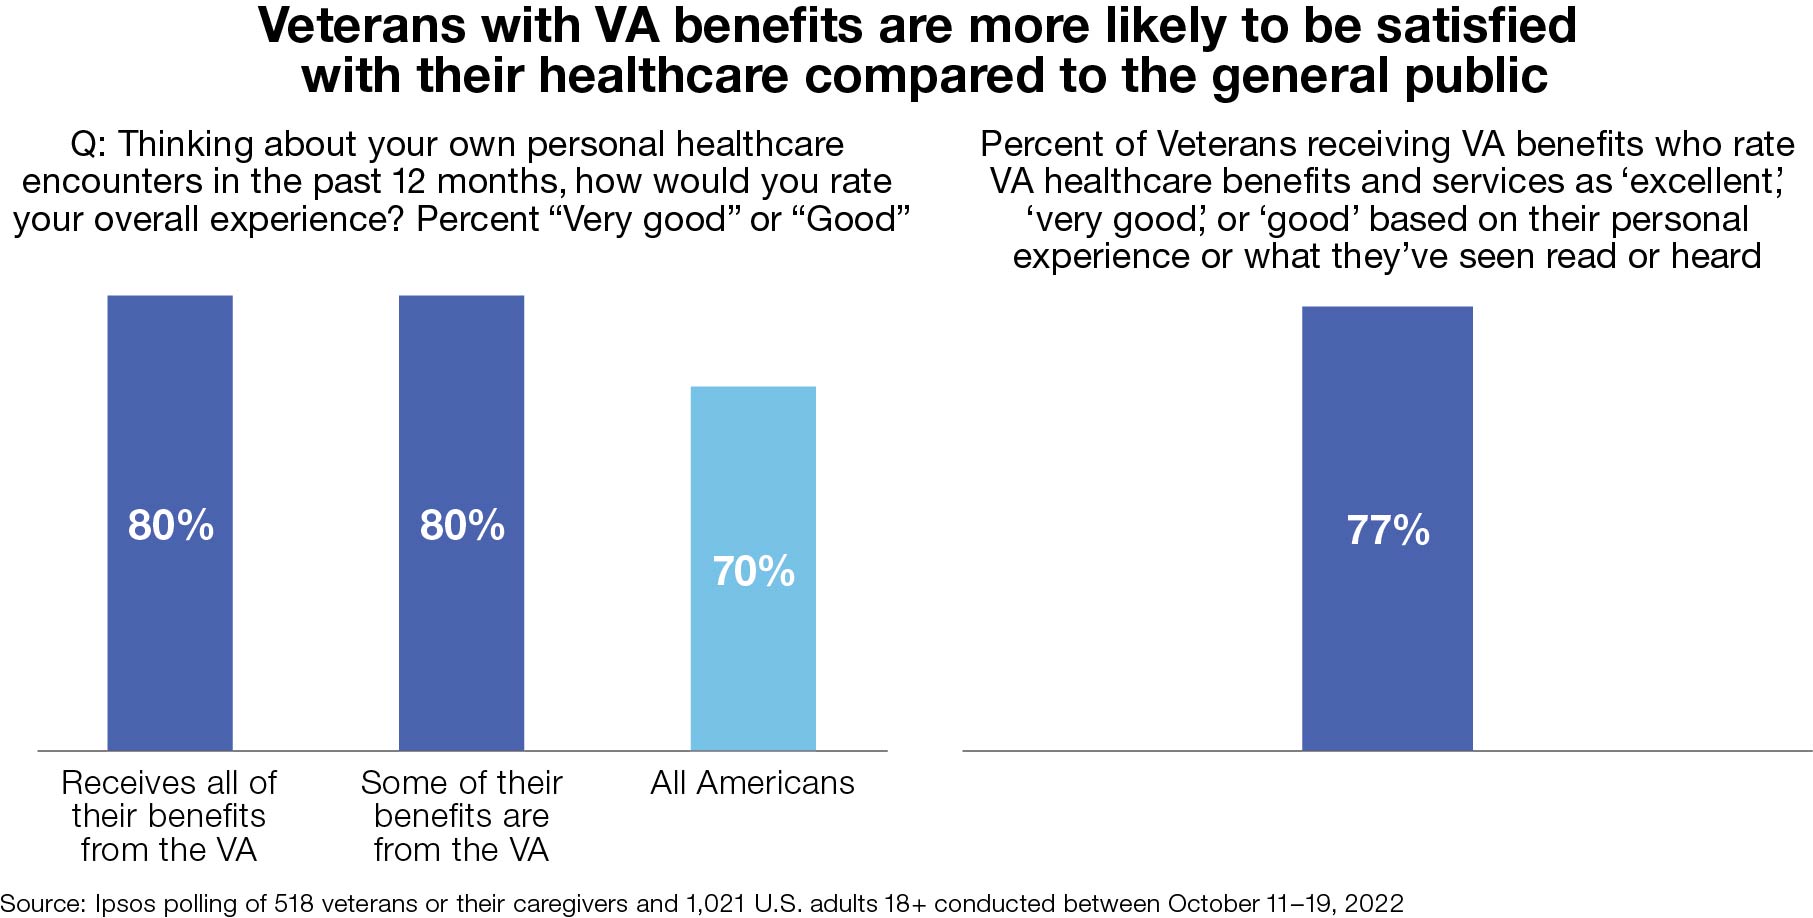 Veterans with VA benefits are more likely to be satisfied with their healthcare compared to the general public